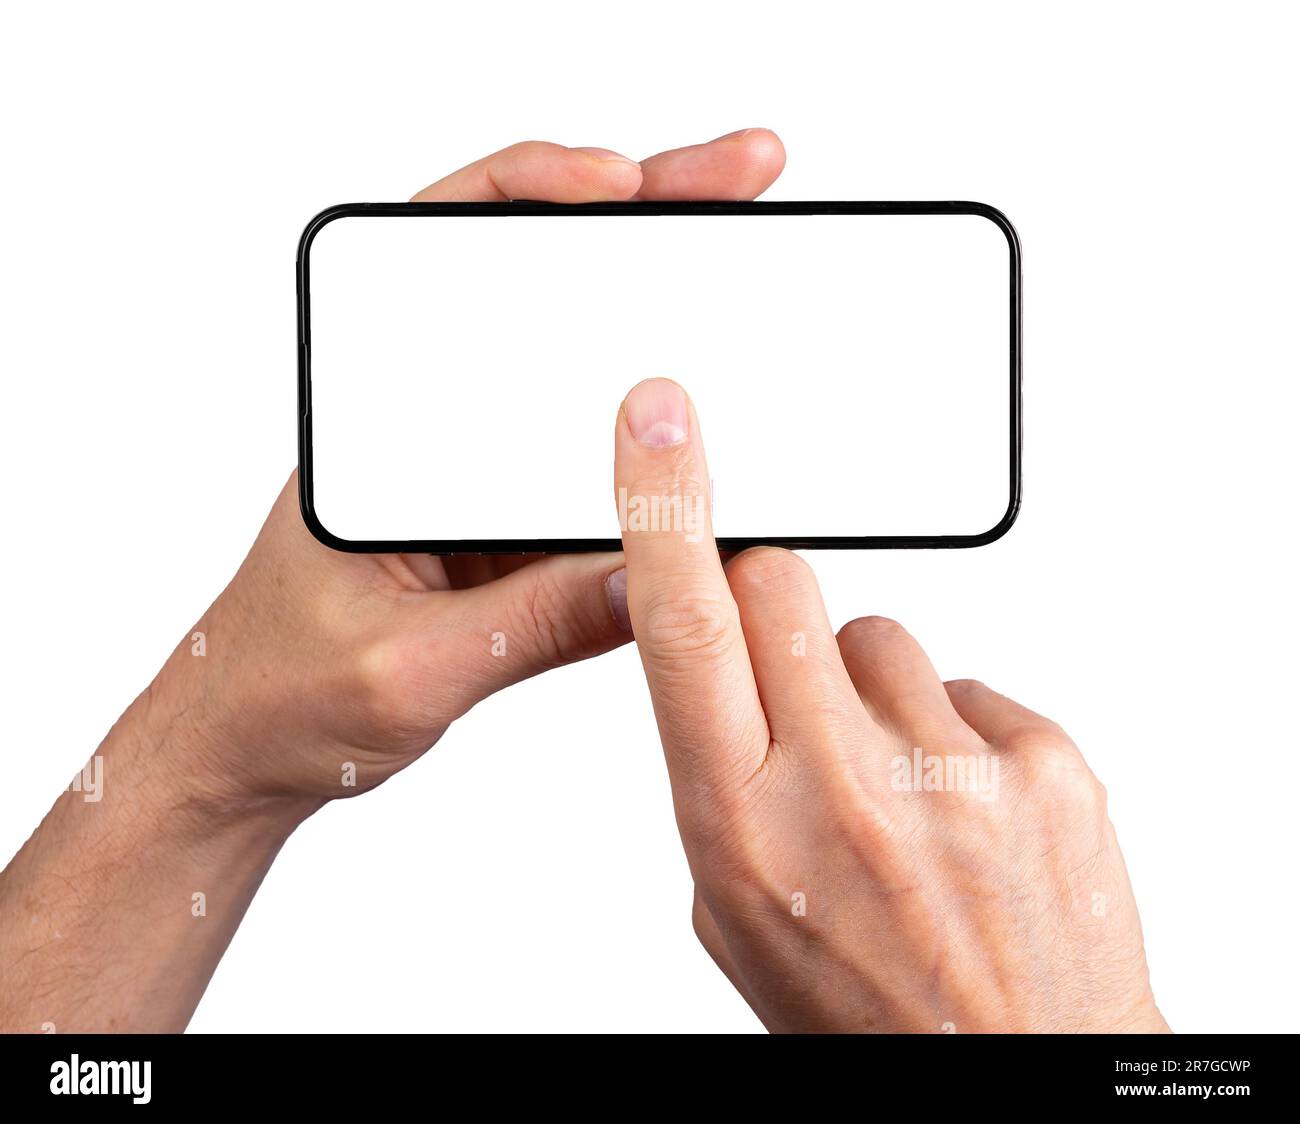 Hand holding smartphone, clicking on blank screen mockup, tapping in center of mobile phone display for playing video, isolated on white background. Stock Photo